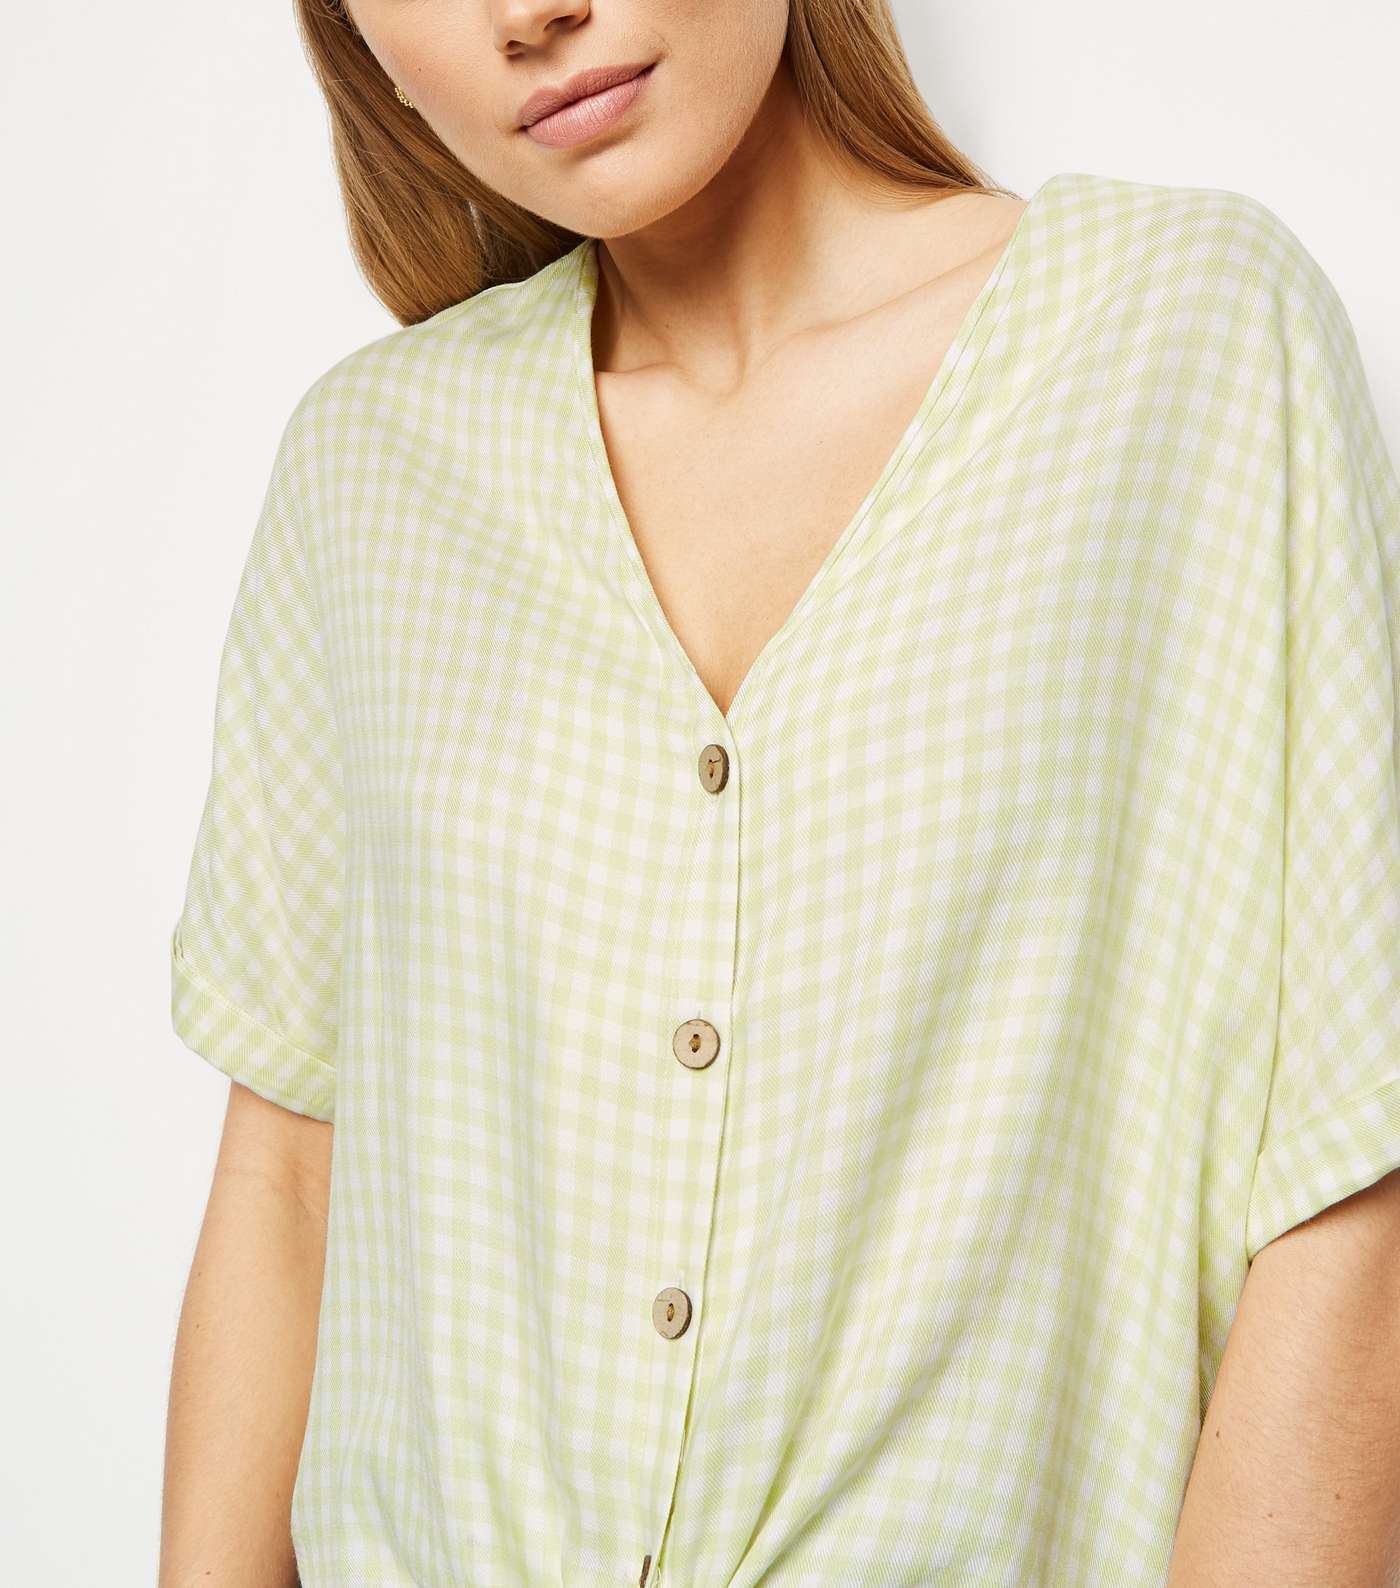 Light Green Gingham Tie Front Shirt Image 2